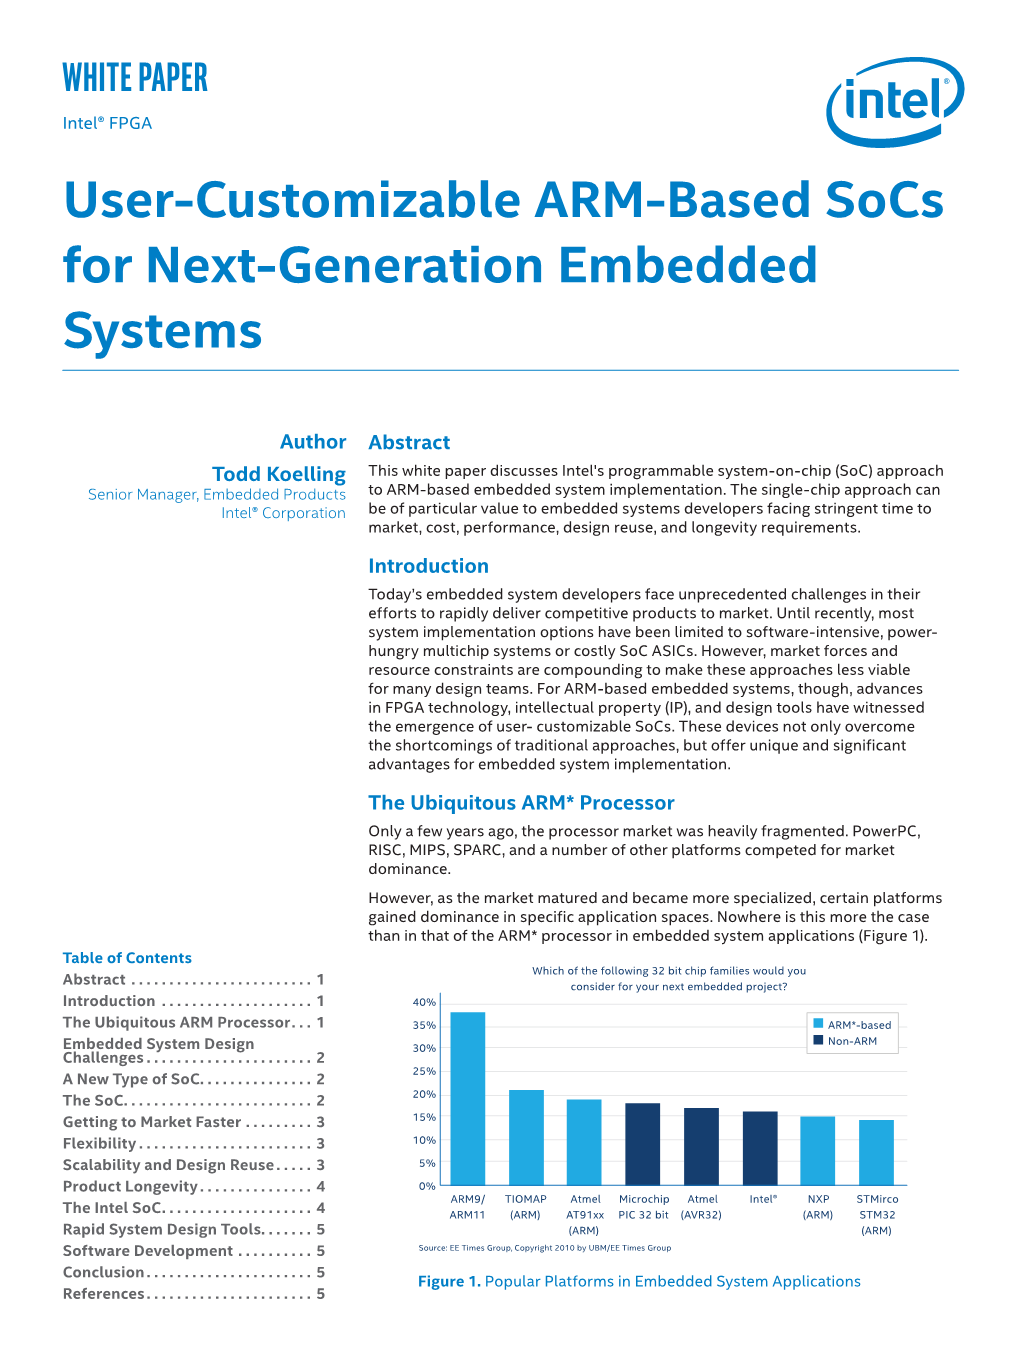 User-Customizable ARM-Based Socs for Next-Generation Embedded Systems